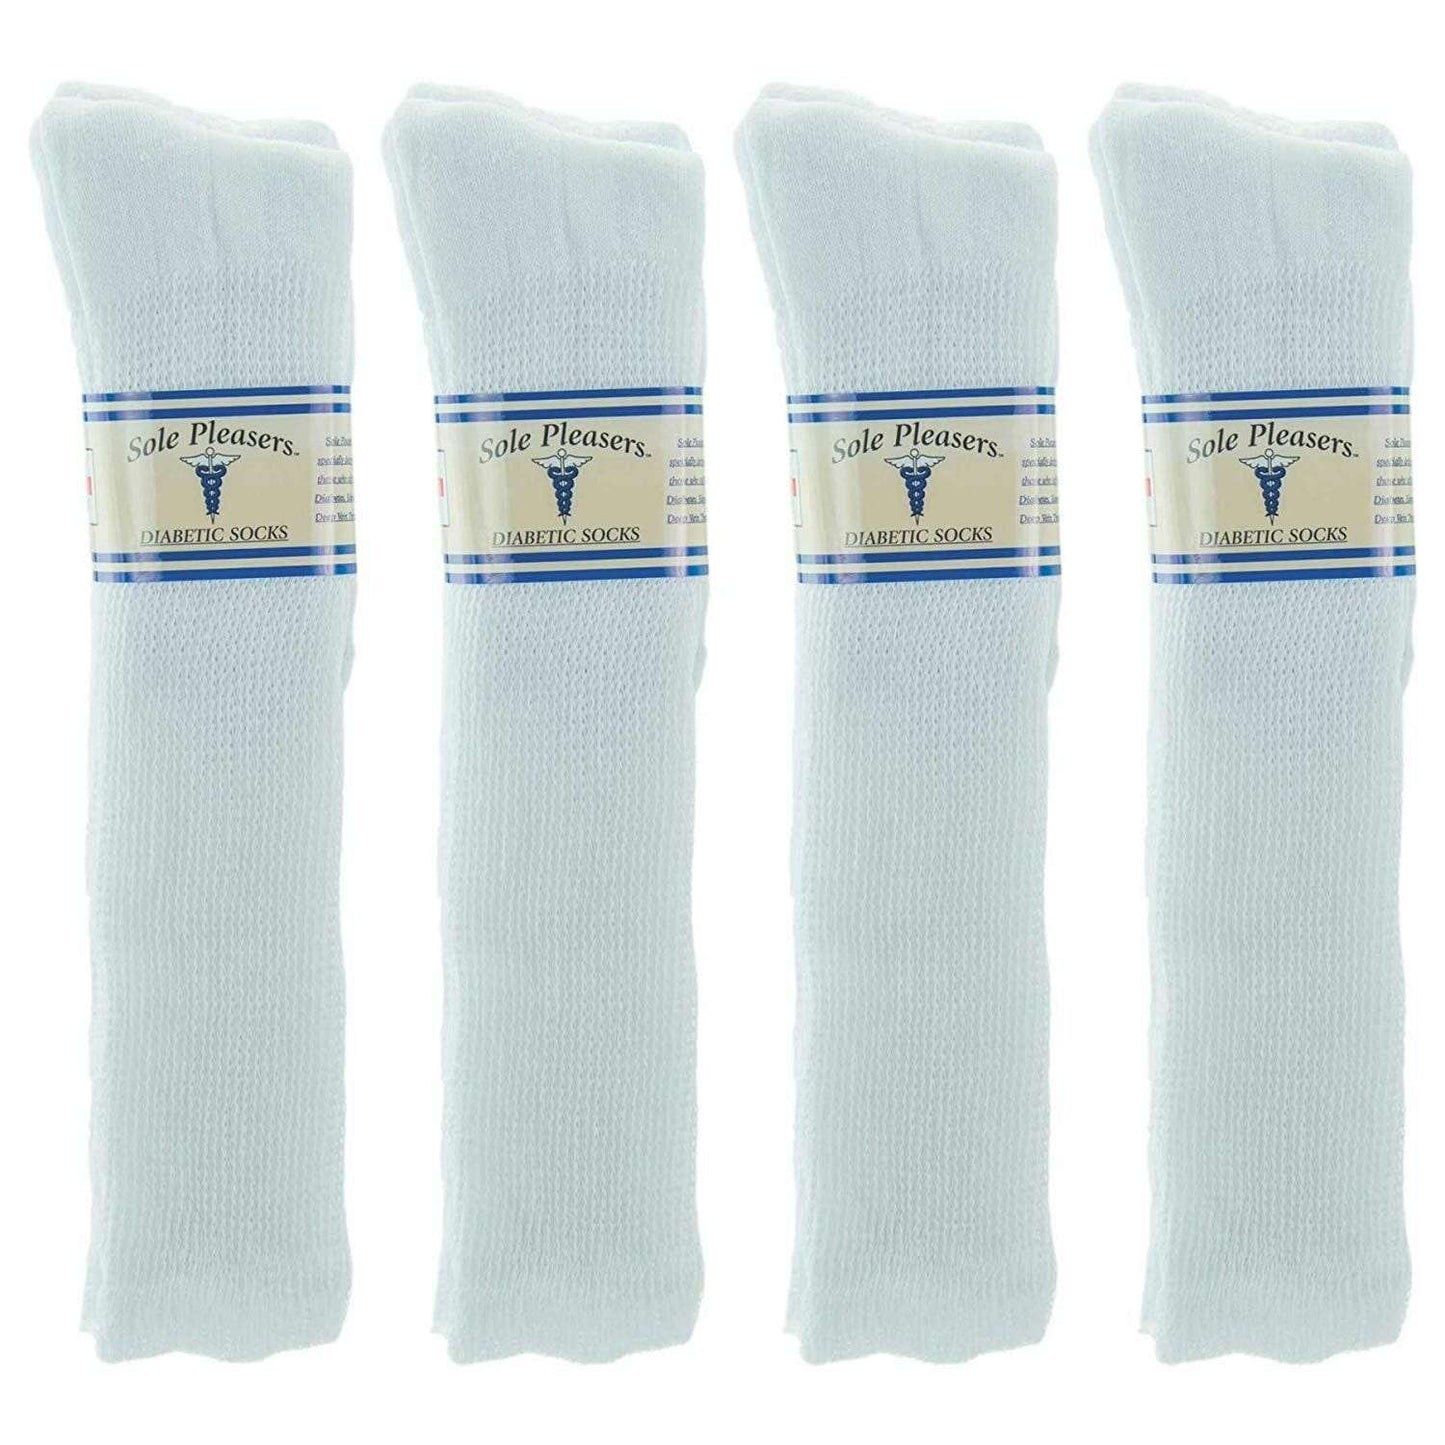 MDR Diabetic Over The Calf Length Crew Socks (12 Pair Pack) Seamless Cotton... - Mdrdistributors